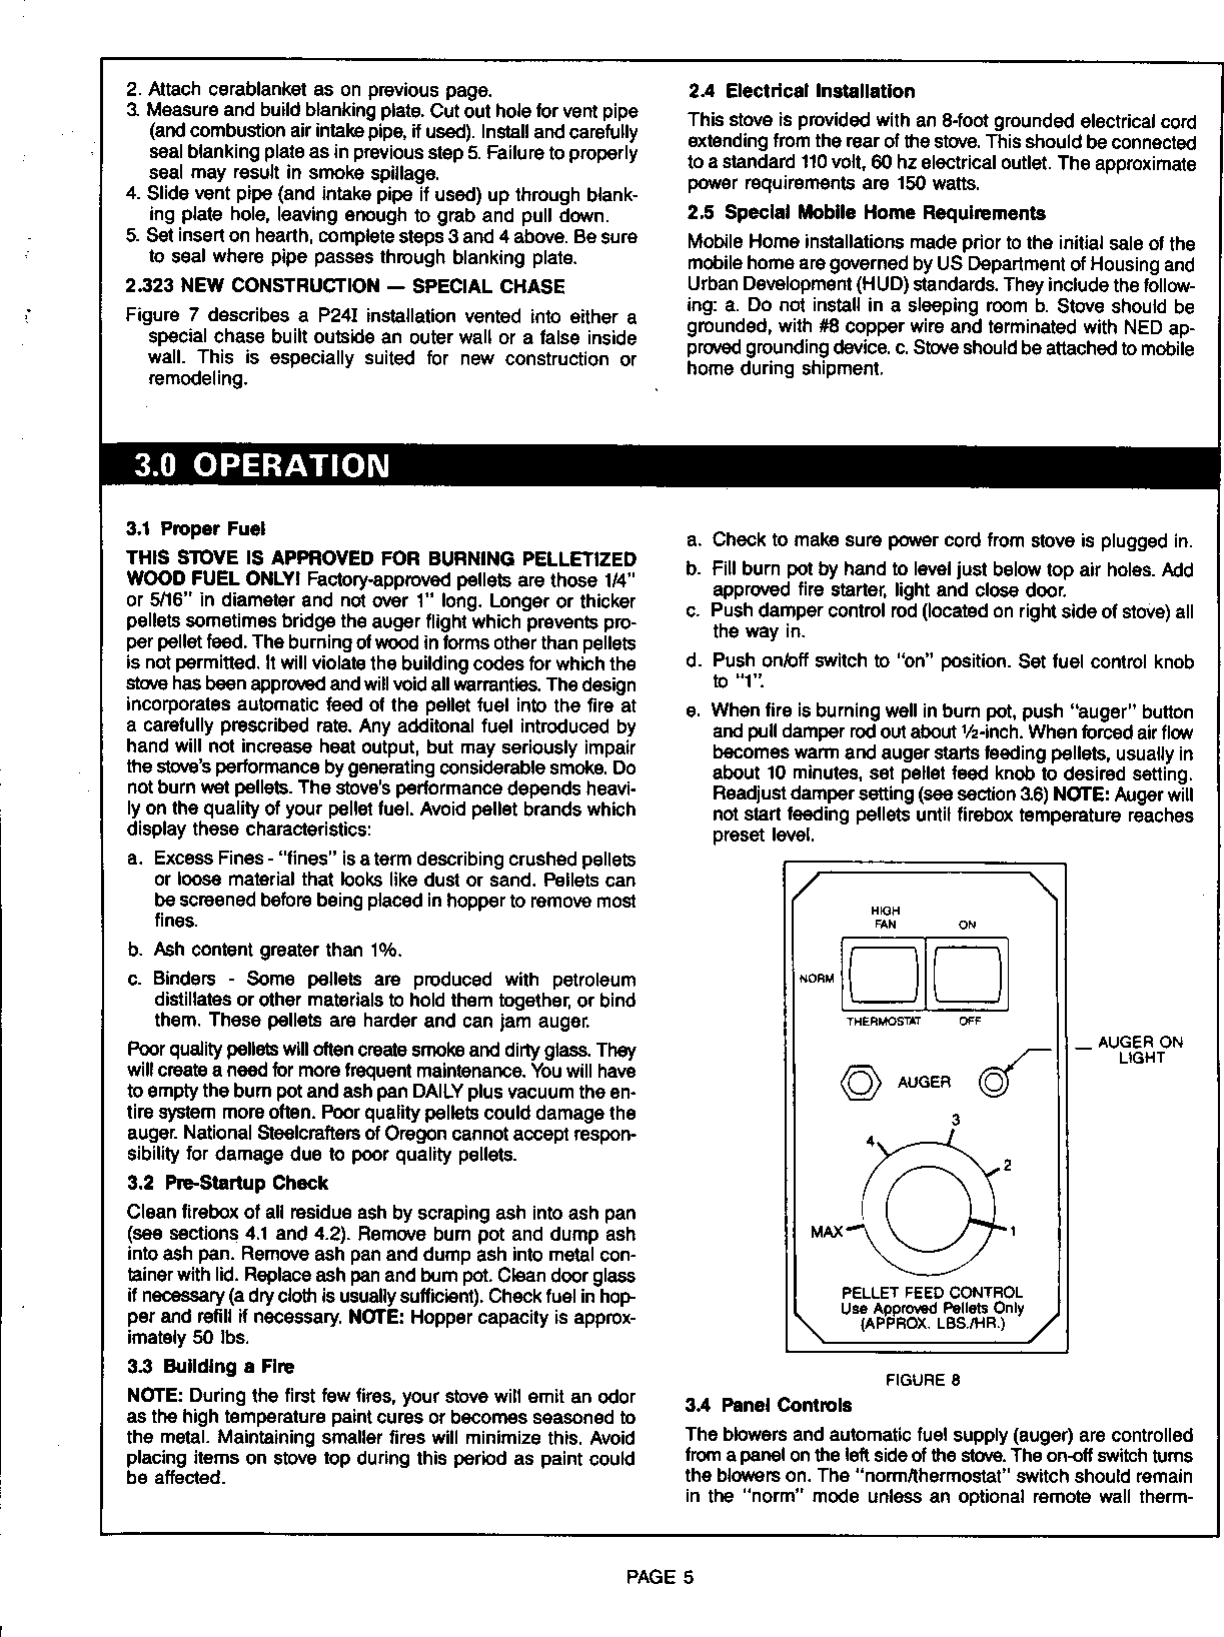 Page 5 of 9 - Breckwell Breckwell-1991-s-P24Fs-Users-Manual- P24 Blazer Pellet Stove Owner's Manual  Breckwell-1991-s-p24fs-users-manual